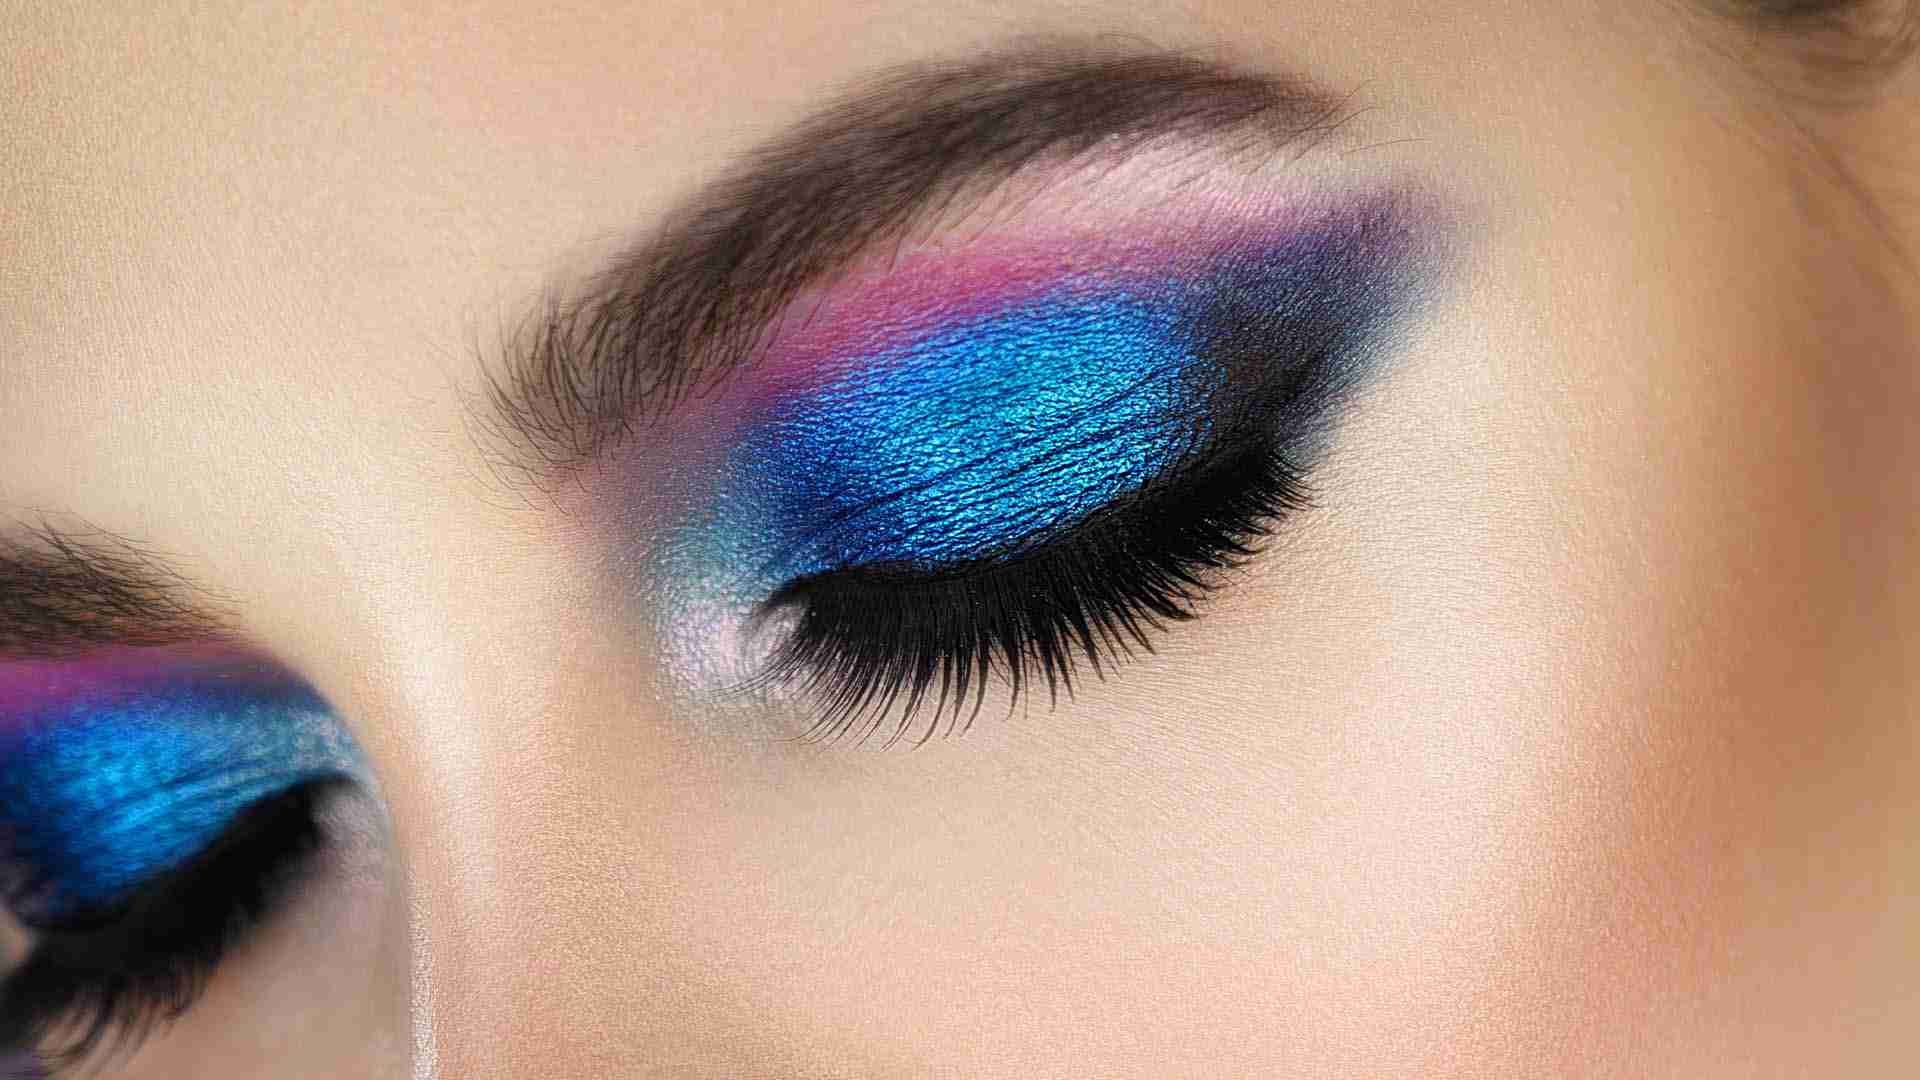 White hair and blue eyeshadow makeup tutorial - wide 2